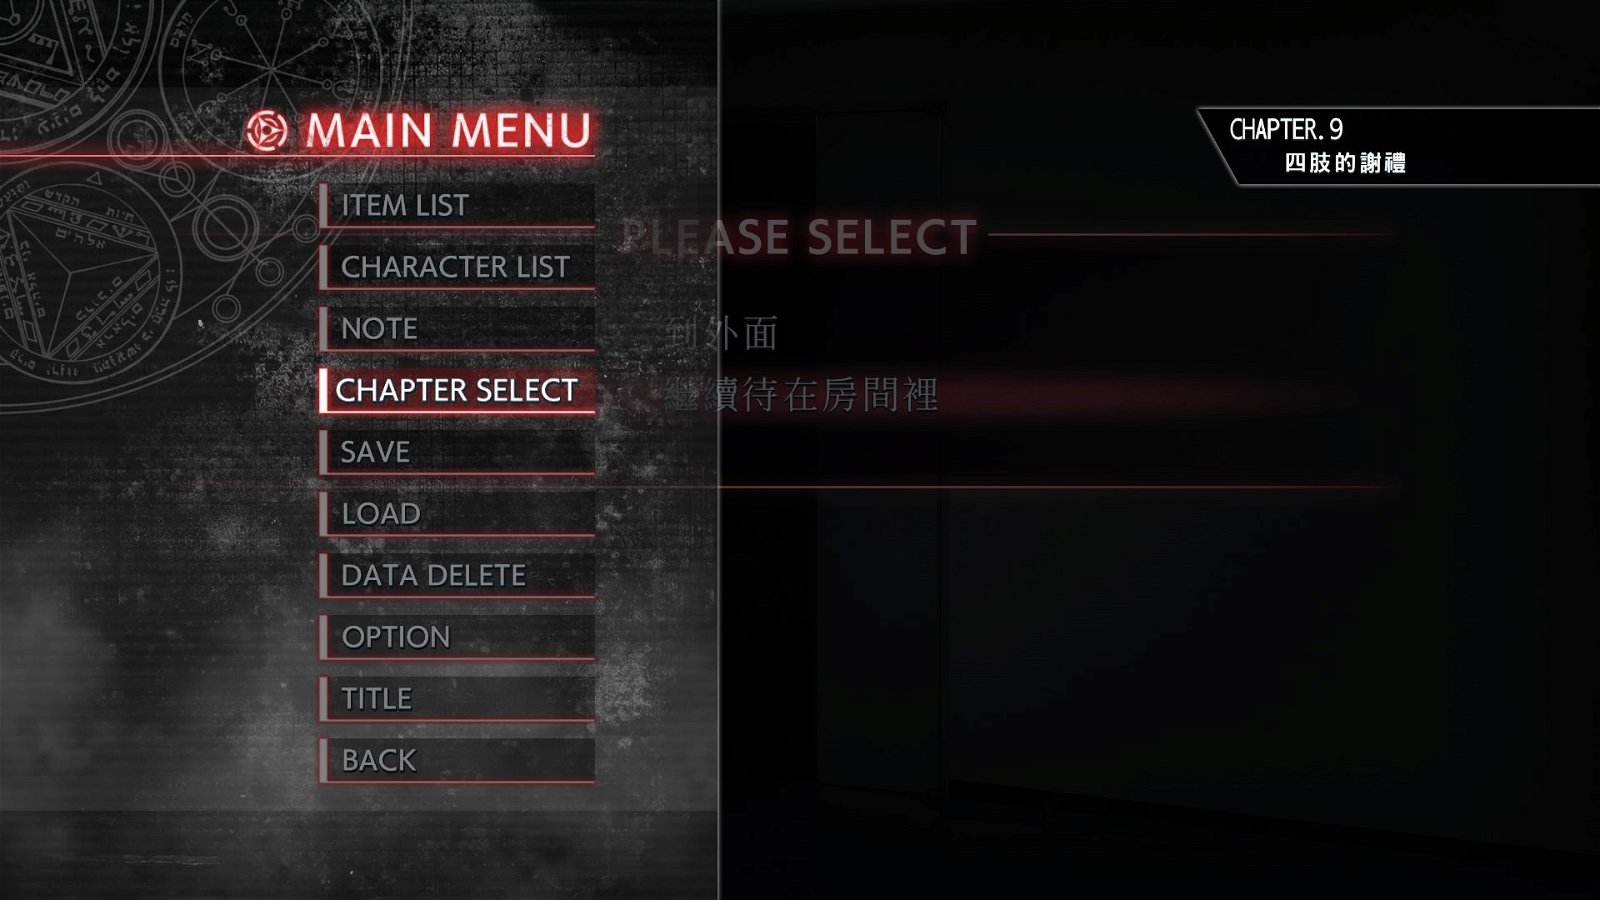 Closed Nightmare offers a wide variety of options for the movie sequences. These include options like to pause, restart, stop, and switch subtitles on or off. Furthermore, there will also be a timeline for the events. With this, players can quickly go back to earlier parts of the game and try different paths. Also, players can easily tell which choices were done already as the game will note it out for them. A character list is also featured in the game to refresh the memory of the players. And there are shortcut menus as well that is not often seen in other horror games.